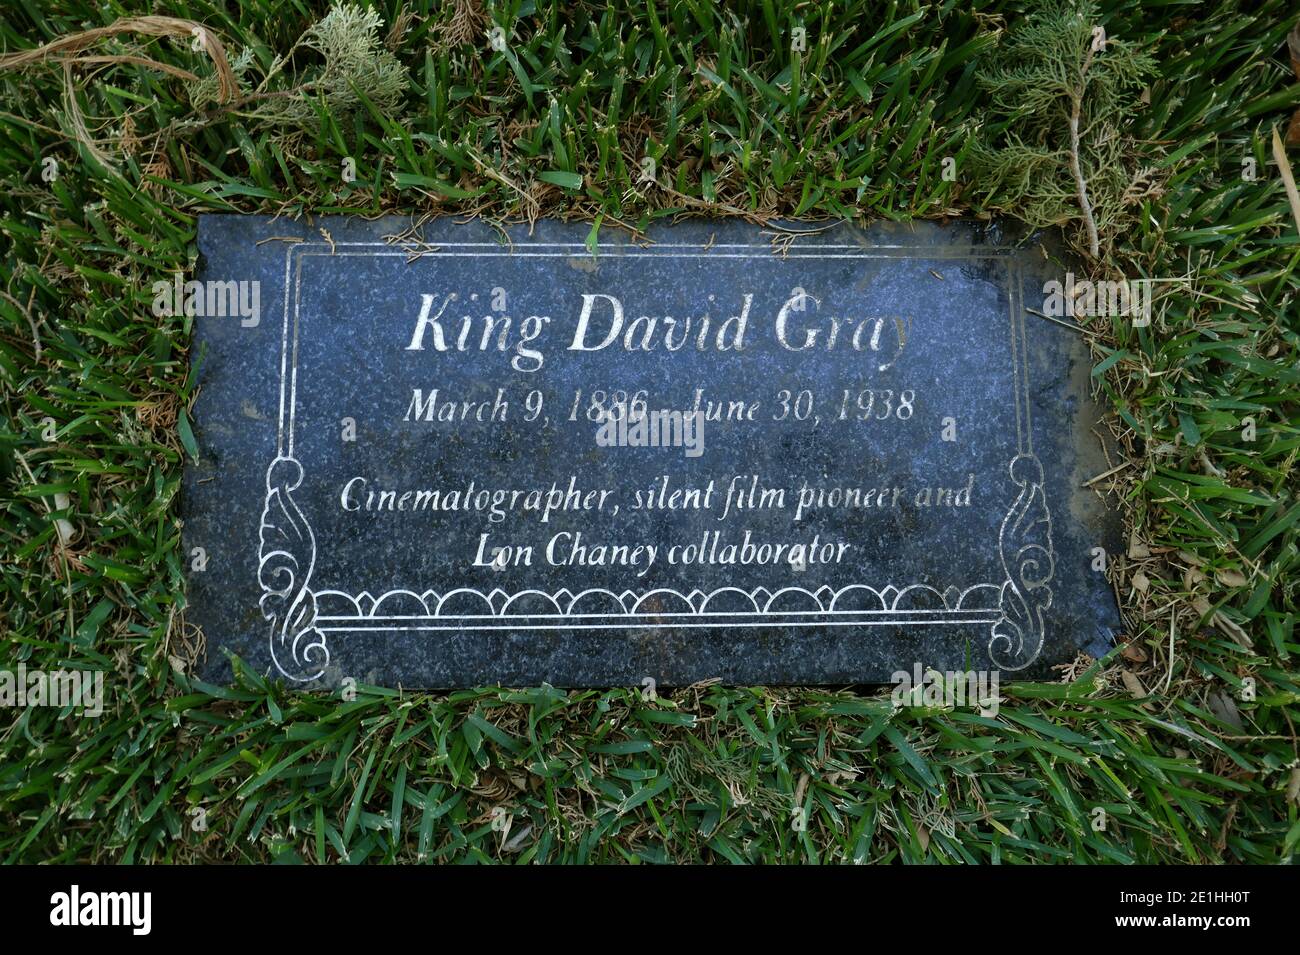 Hollywood, California, USA 30th December 2020 A general view of atmosphere of cinematographer King David Gray's Grave at Hollywood Forever Cemetery on December 30, 2020 in Hollywood, California, USA. Photo by Barry King/Alamy Stock Photo Stock Photo